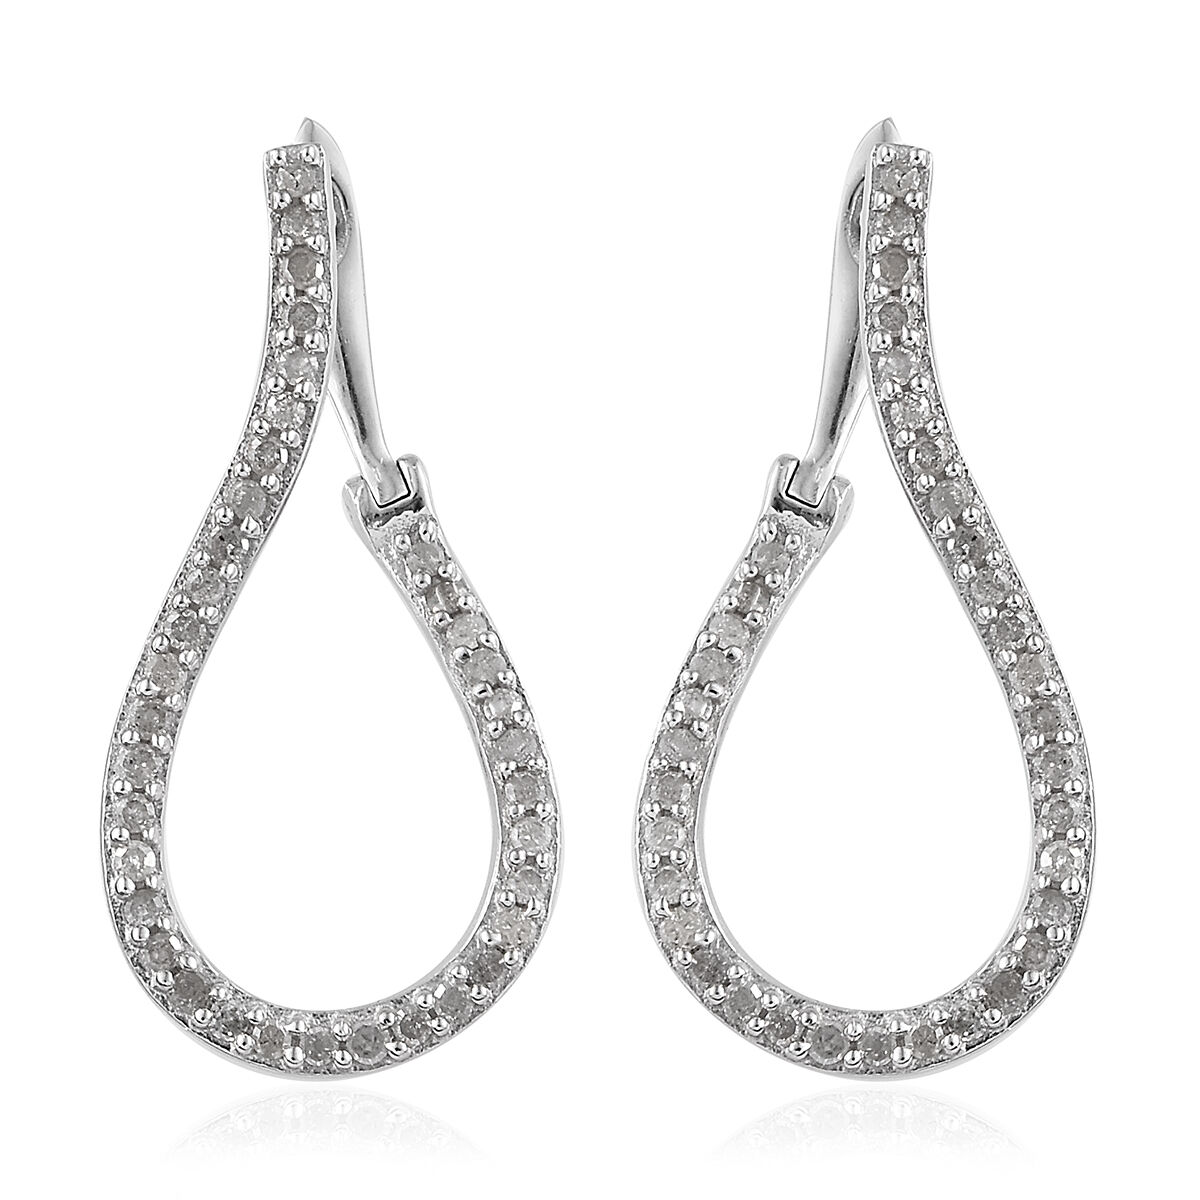 TJC White Diamond Stud Earrings for Women for Her in Platinum Plated Silver